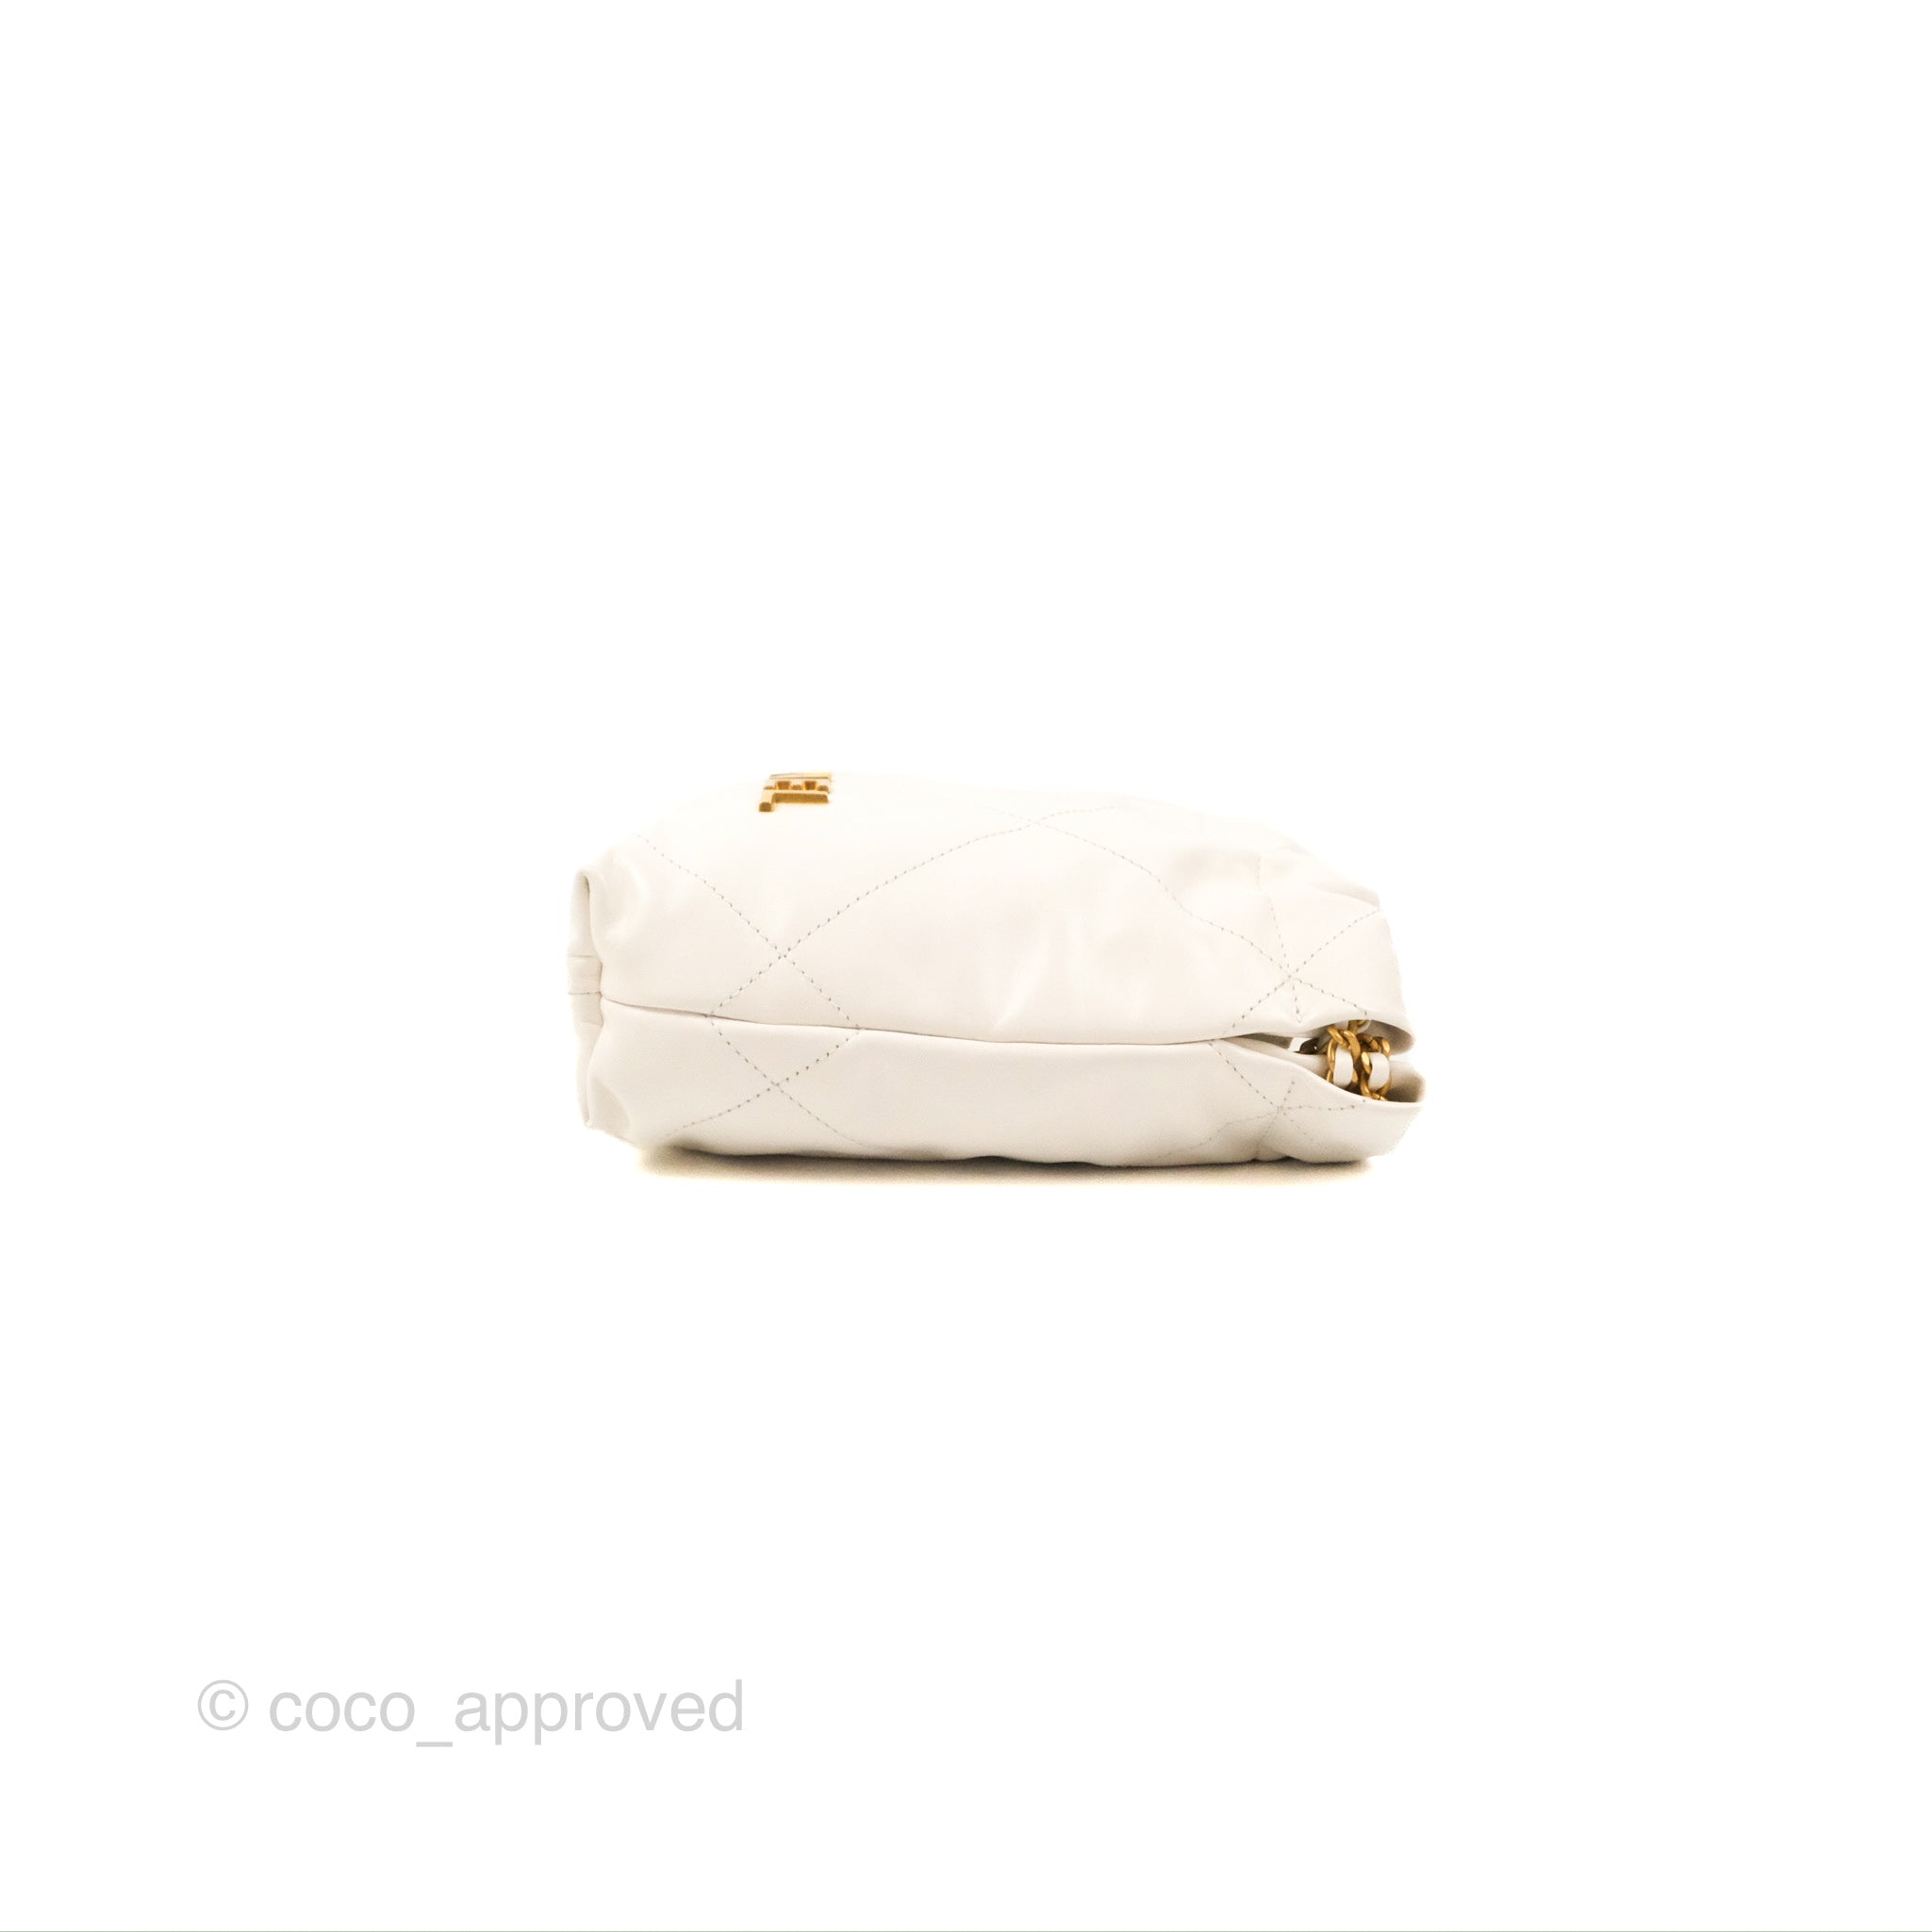 Chanel 22 Mini Bag White Shiny Crumpled Calfskin – Coco Approved